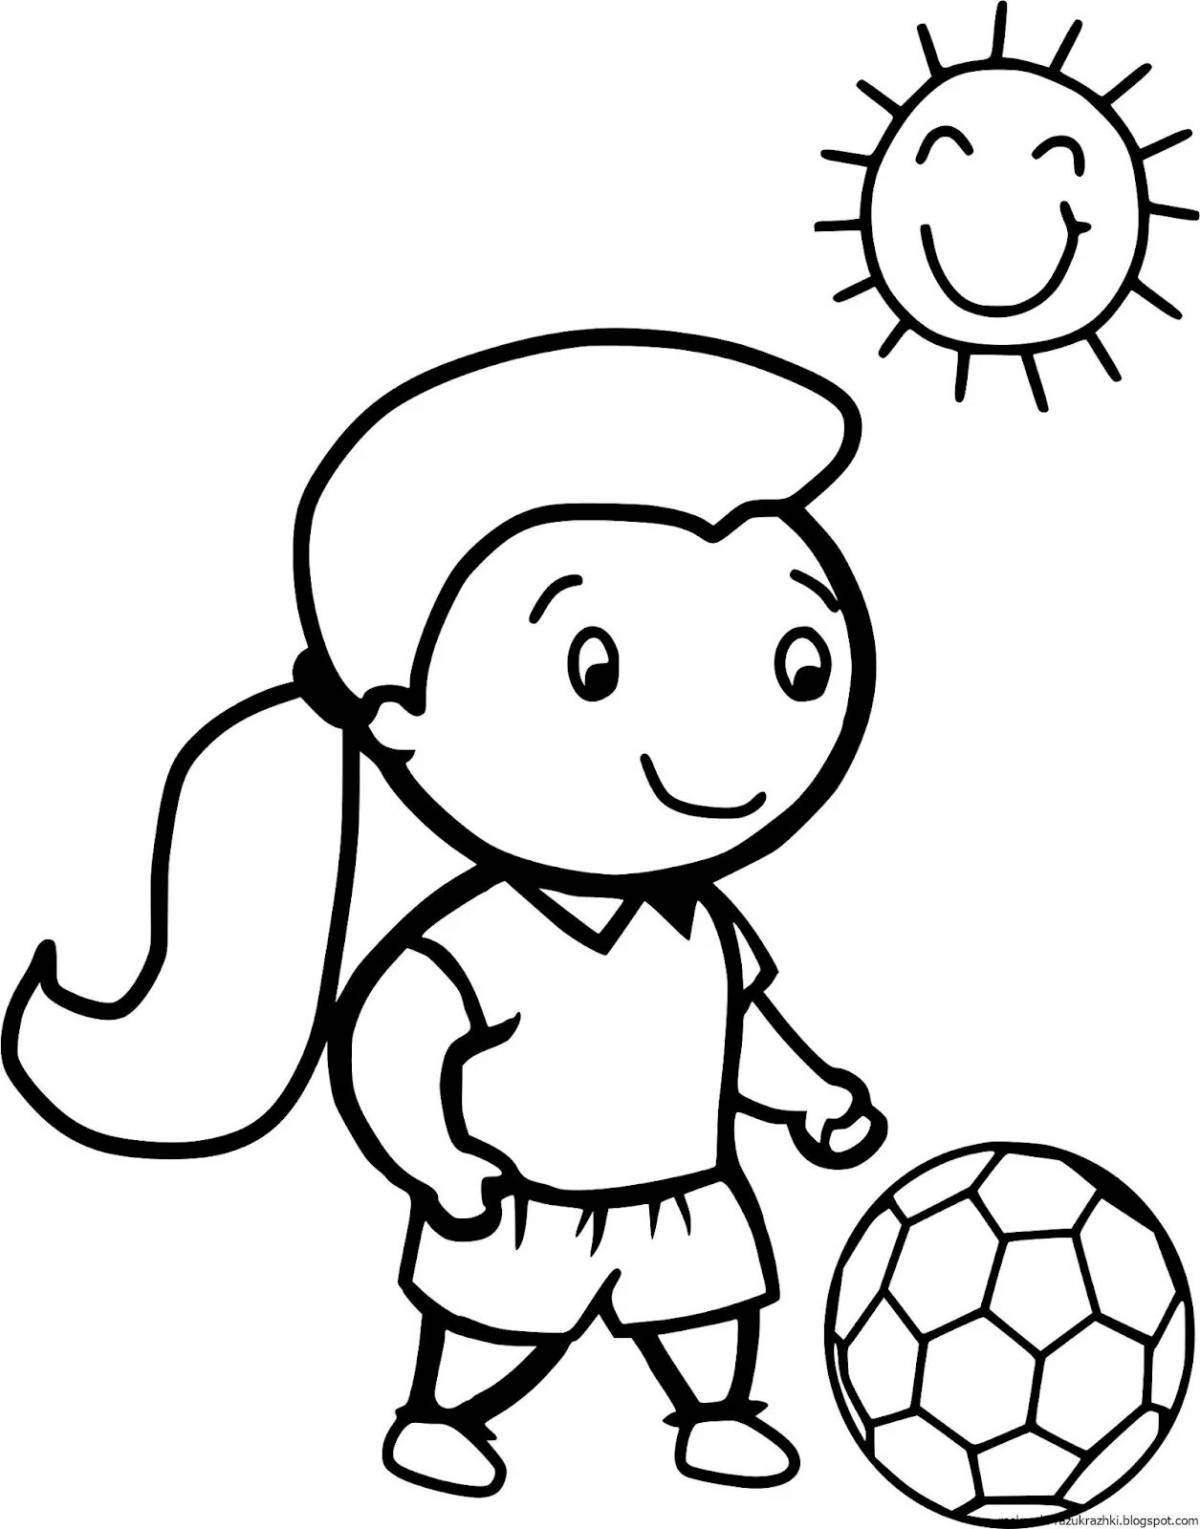 Joyful sports coloring book for kids 5-6 years old